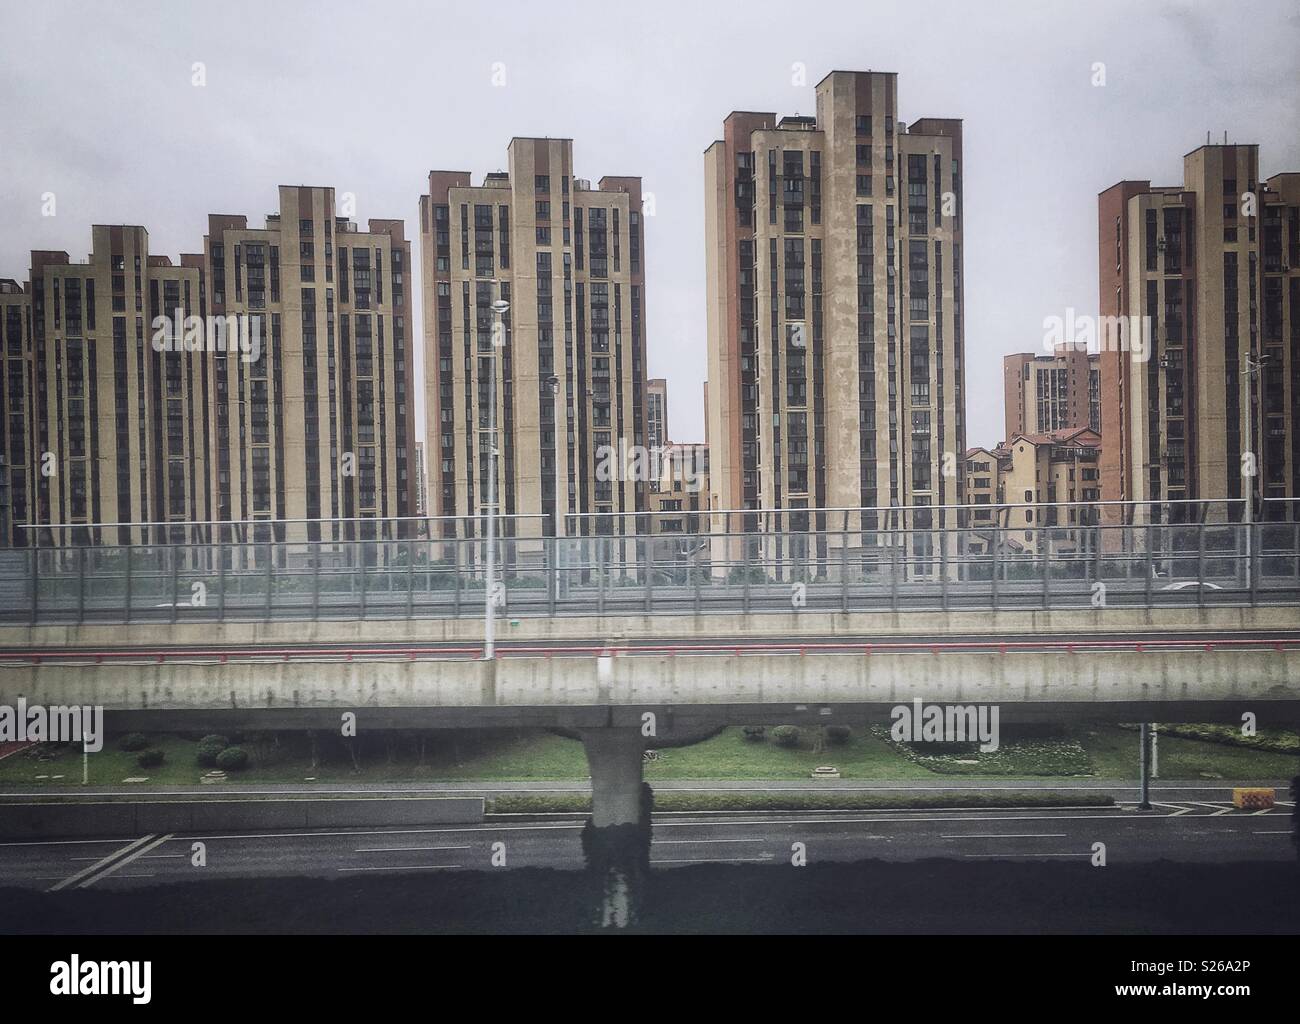 Skyline of a identical skyscrapers and highway bridge in China. Stock Photo